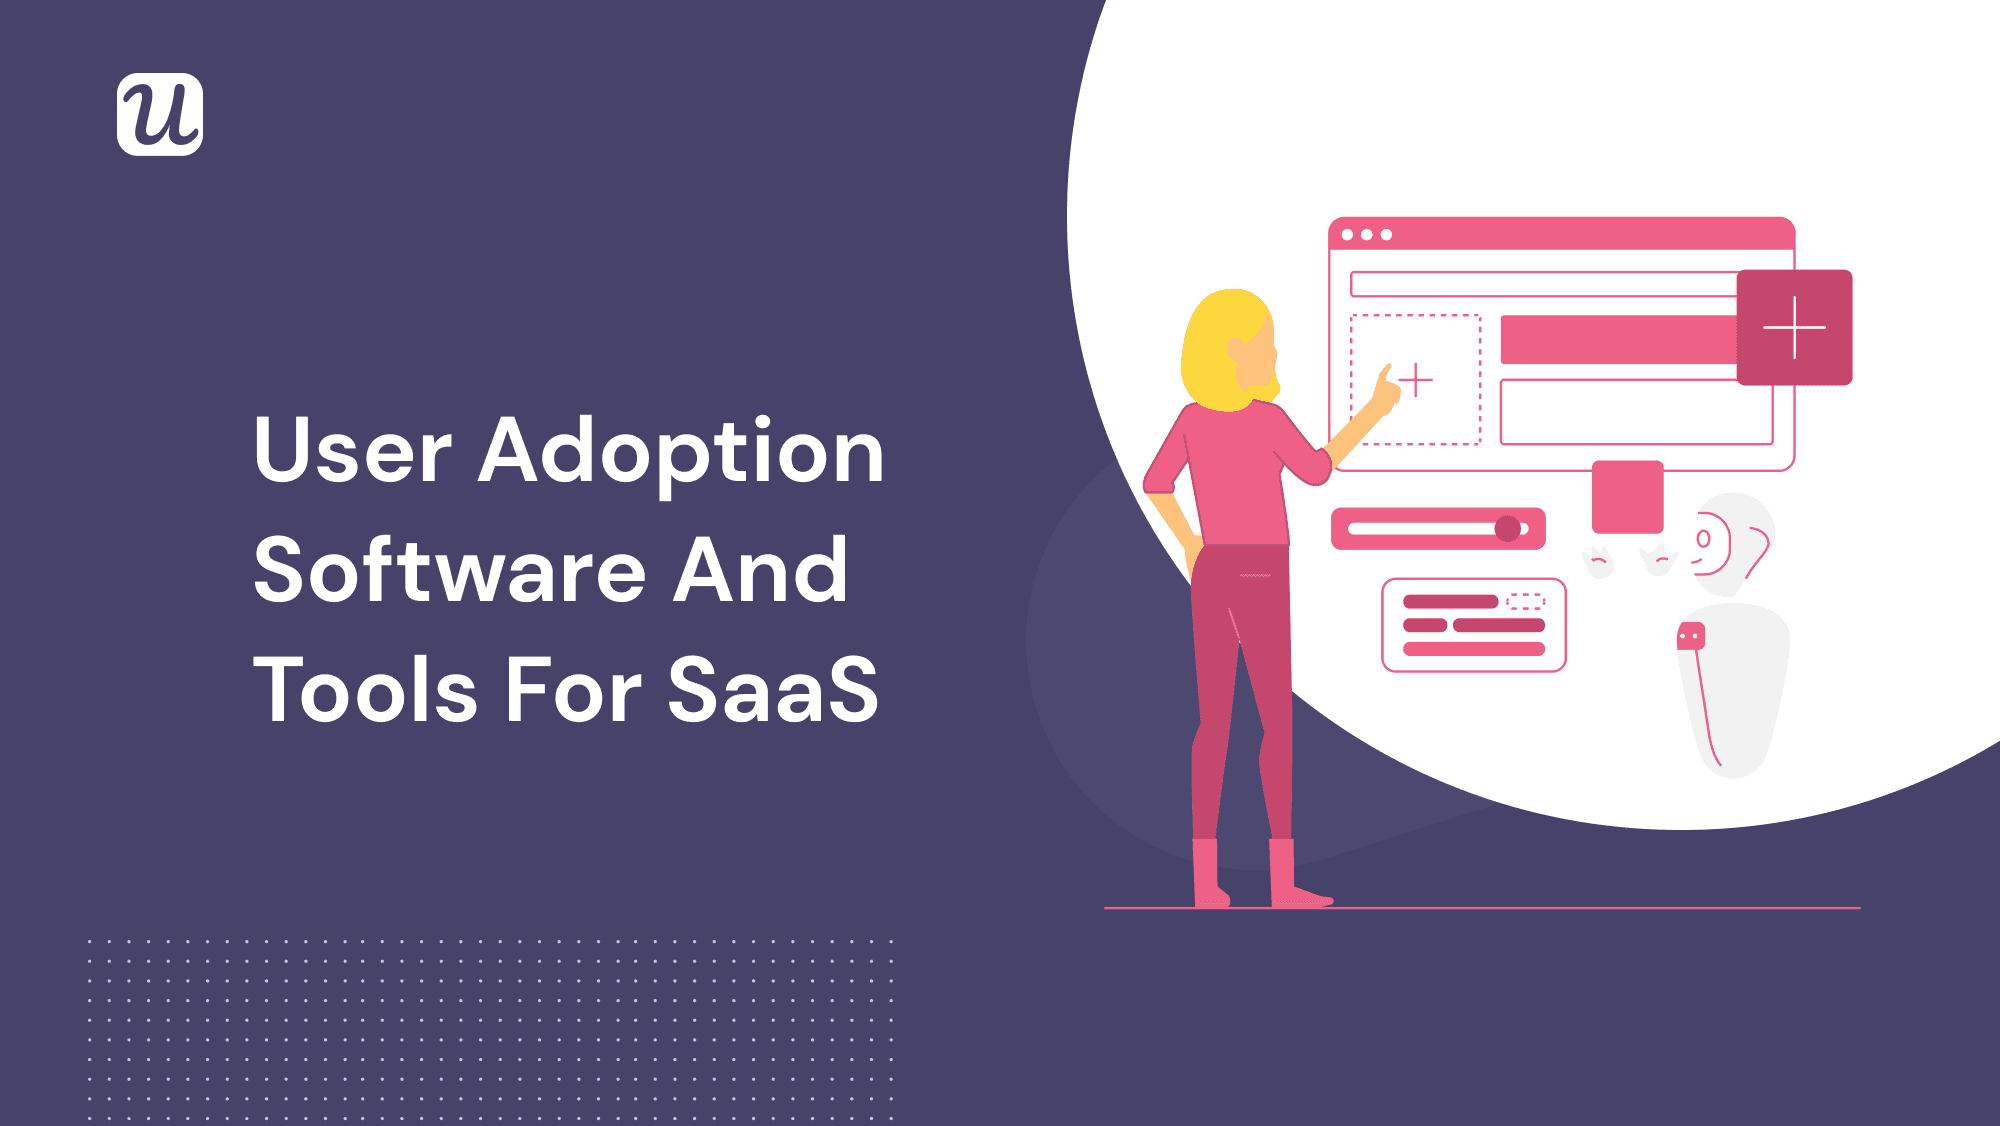 What are the Best User Adoption Software and Tools for SaaS?